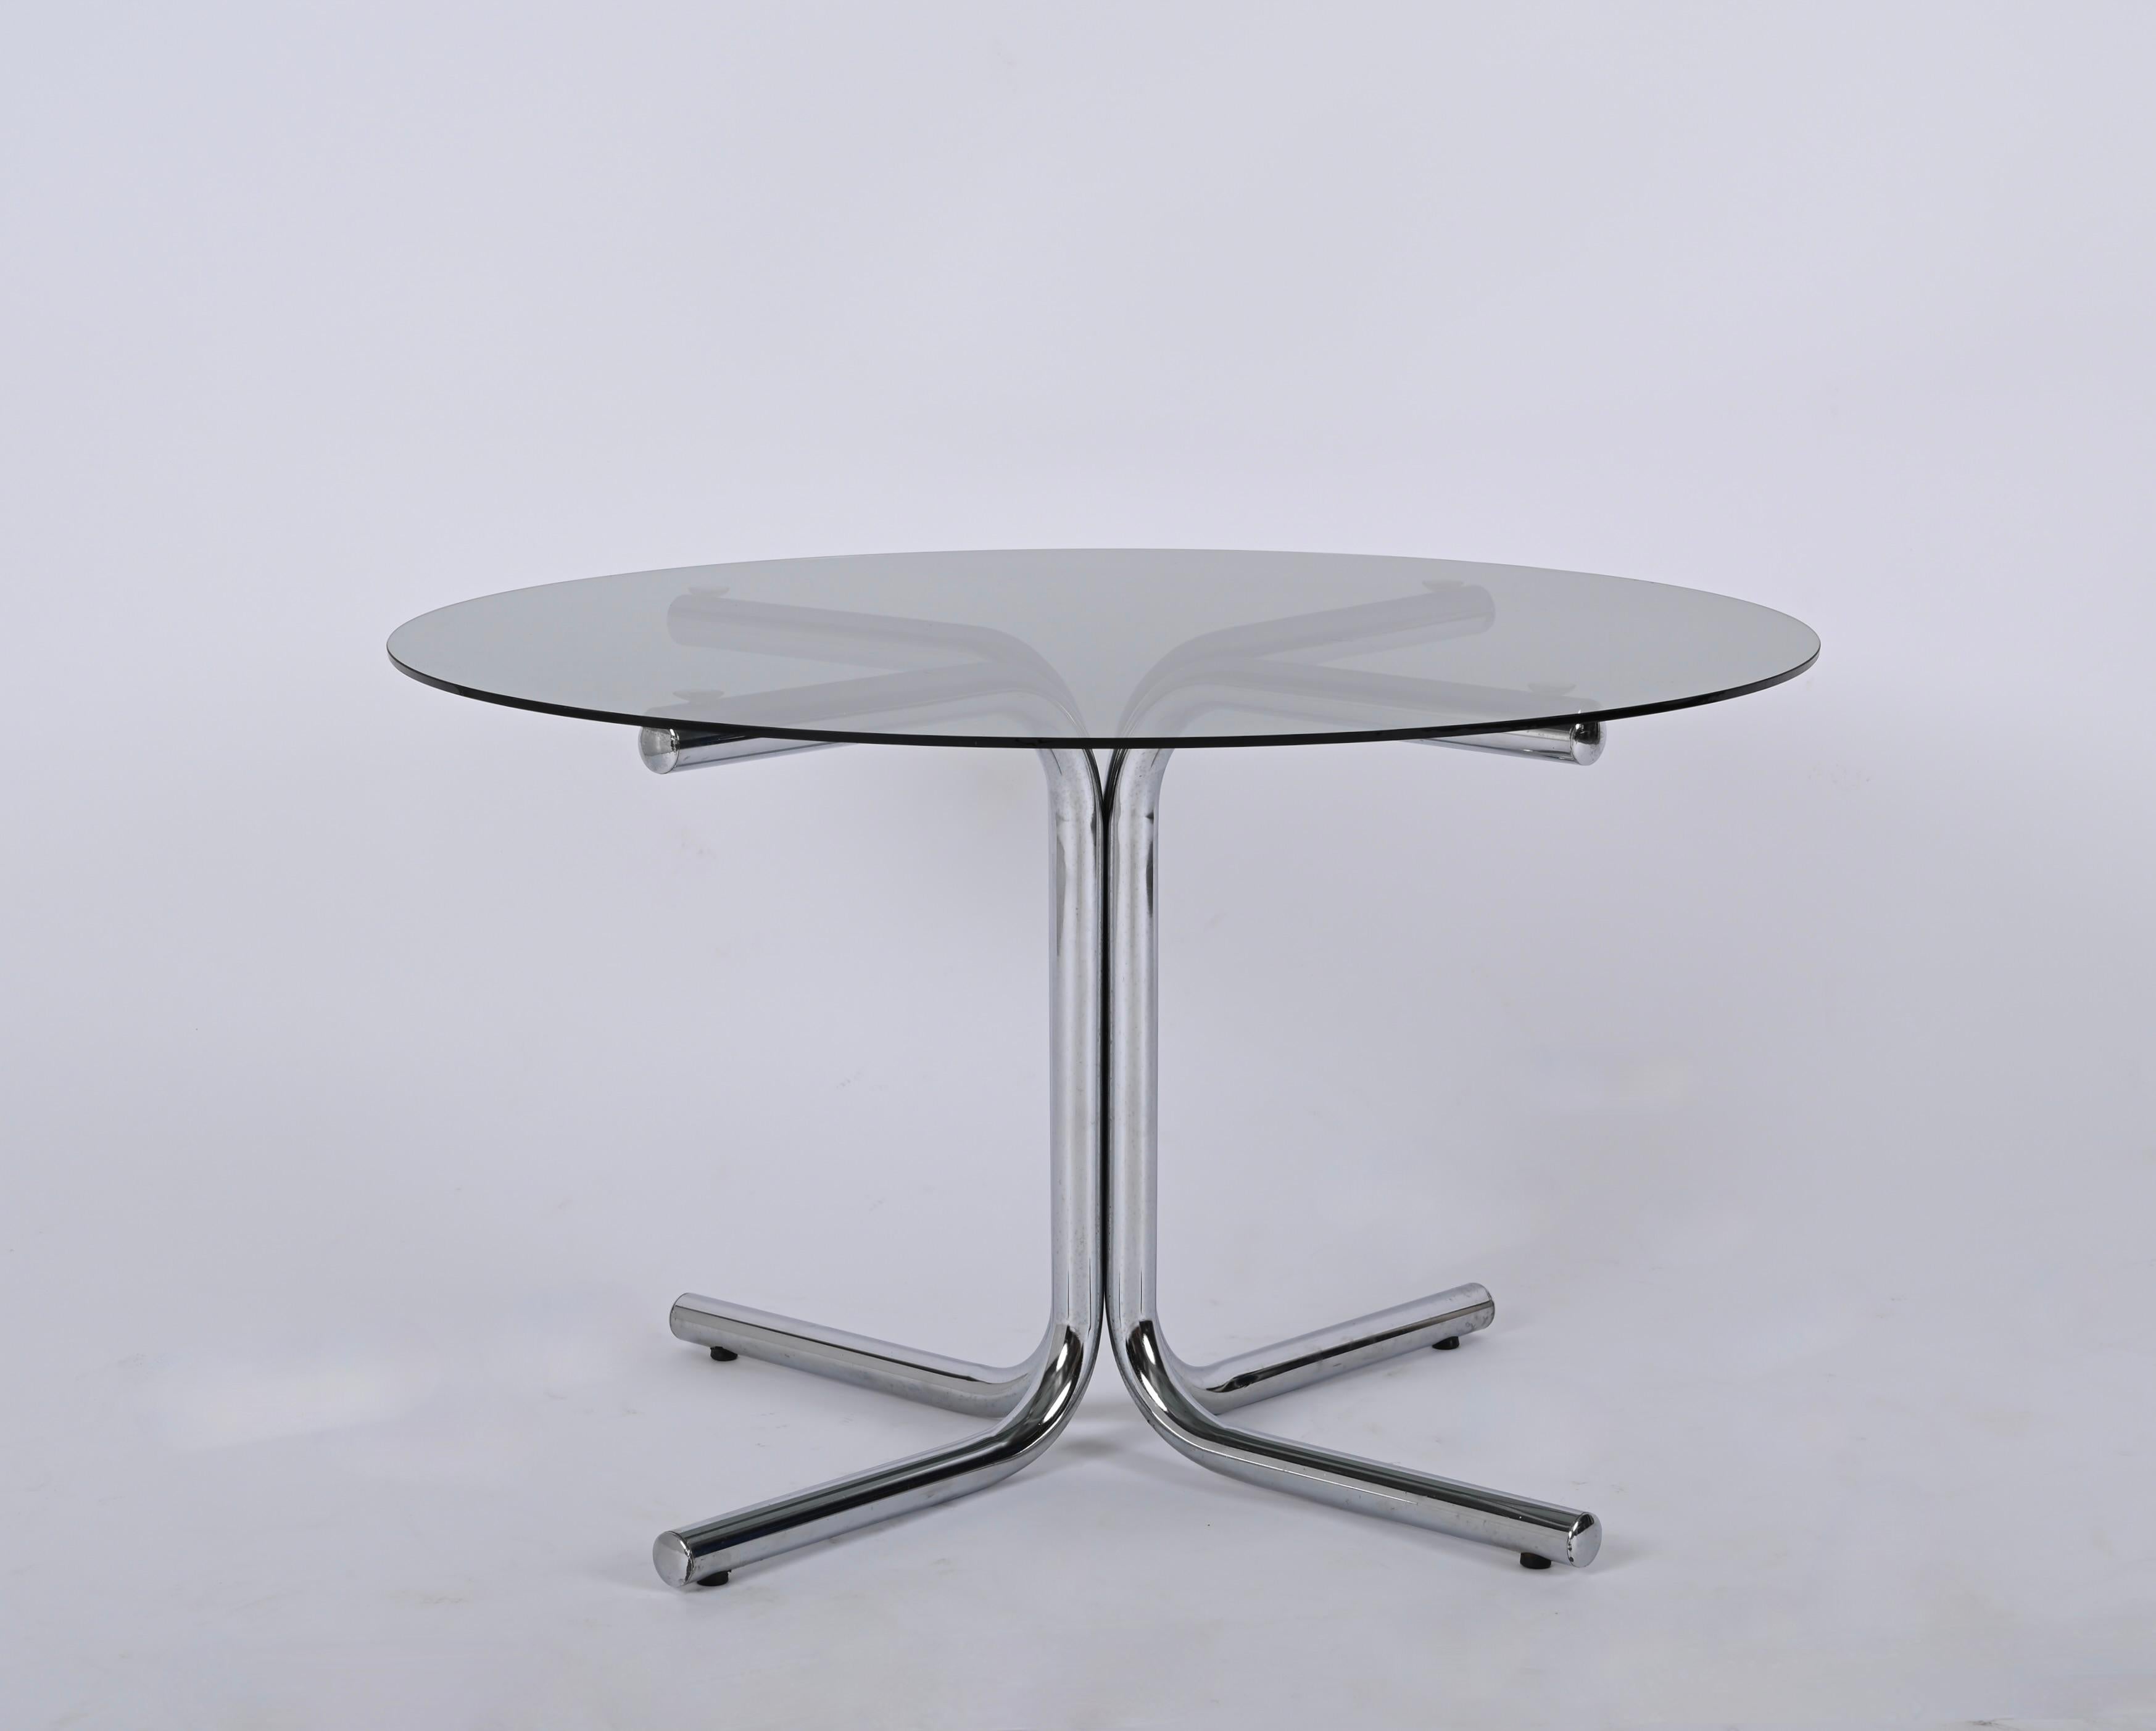 Metal Chrome and Smoked Glass Round Italian Coffee Table, Giotto Stoppino Style, 1970s For Sale